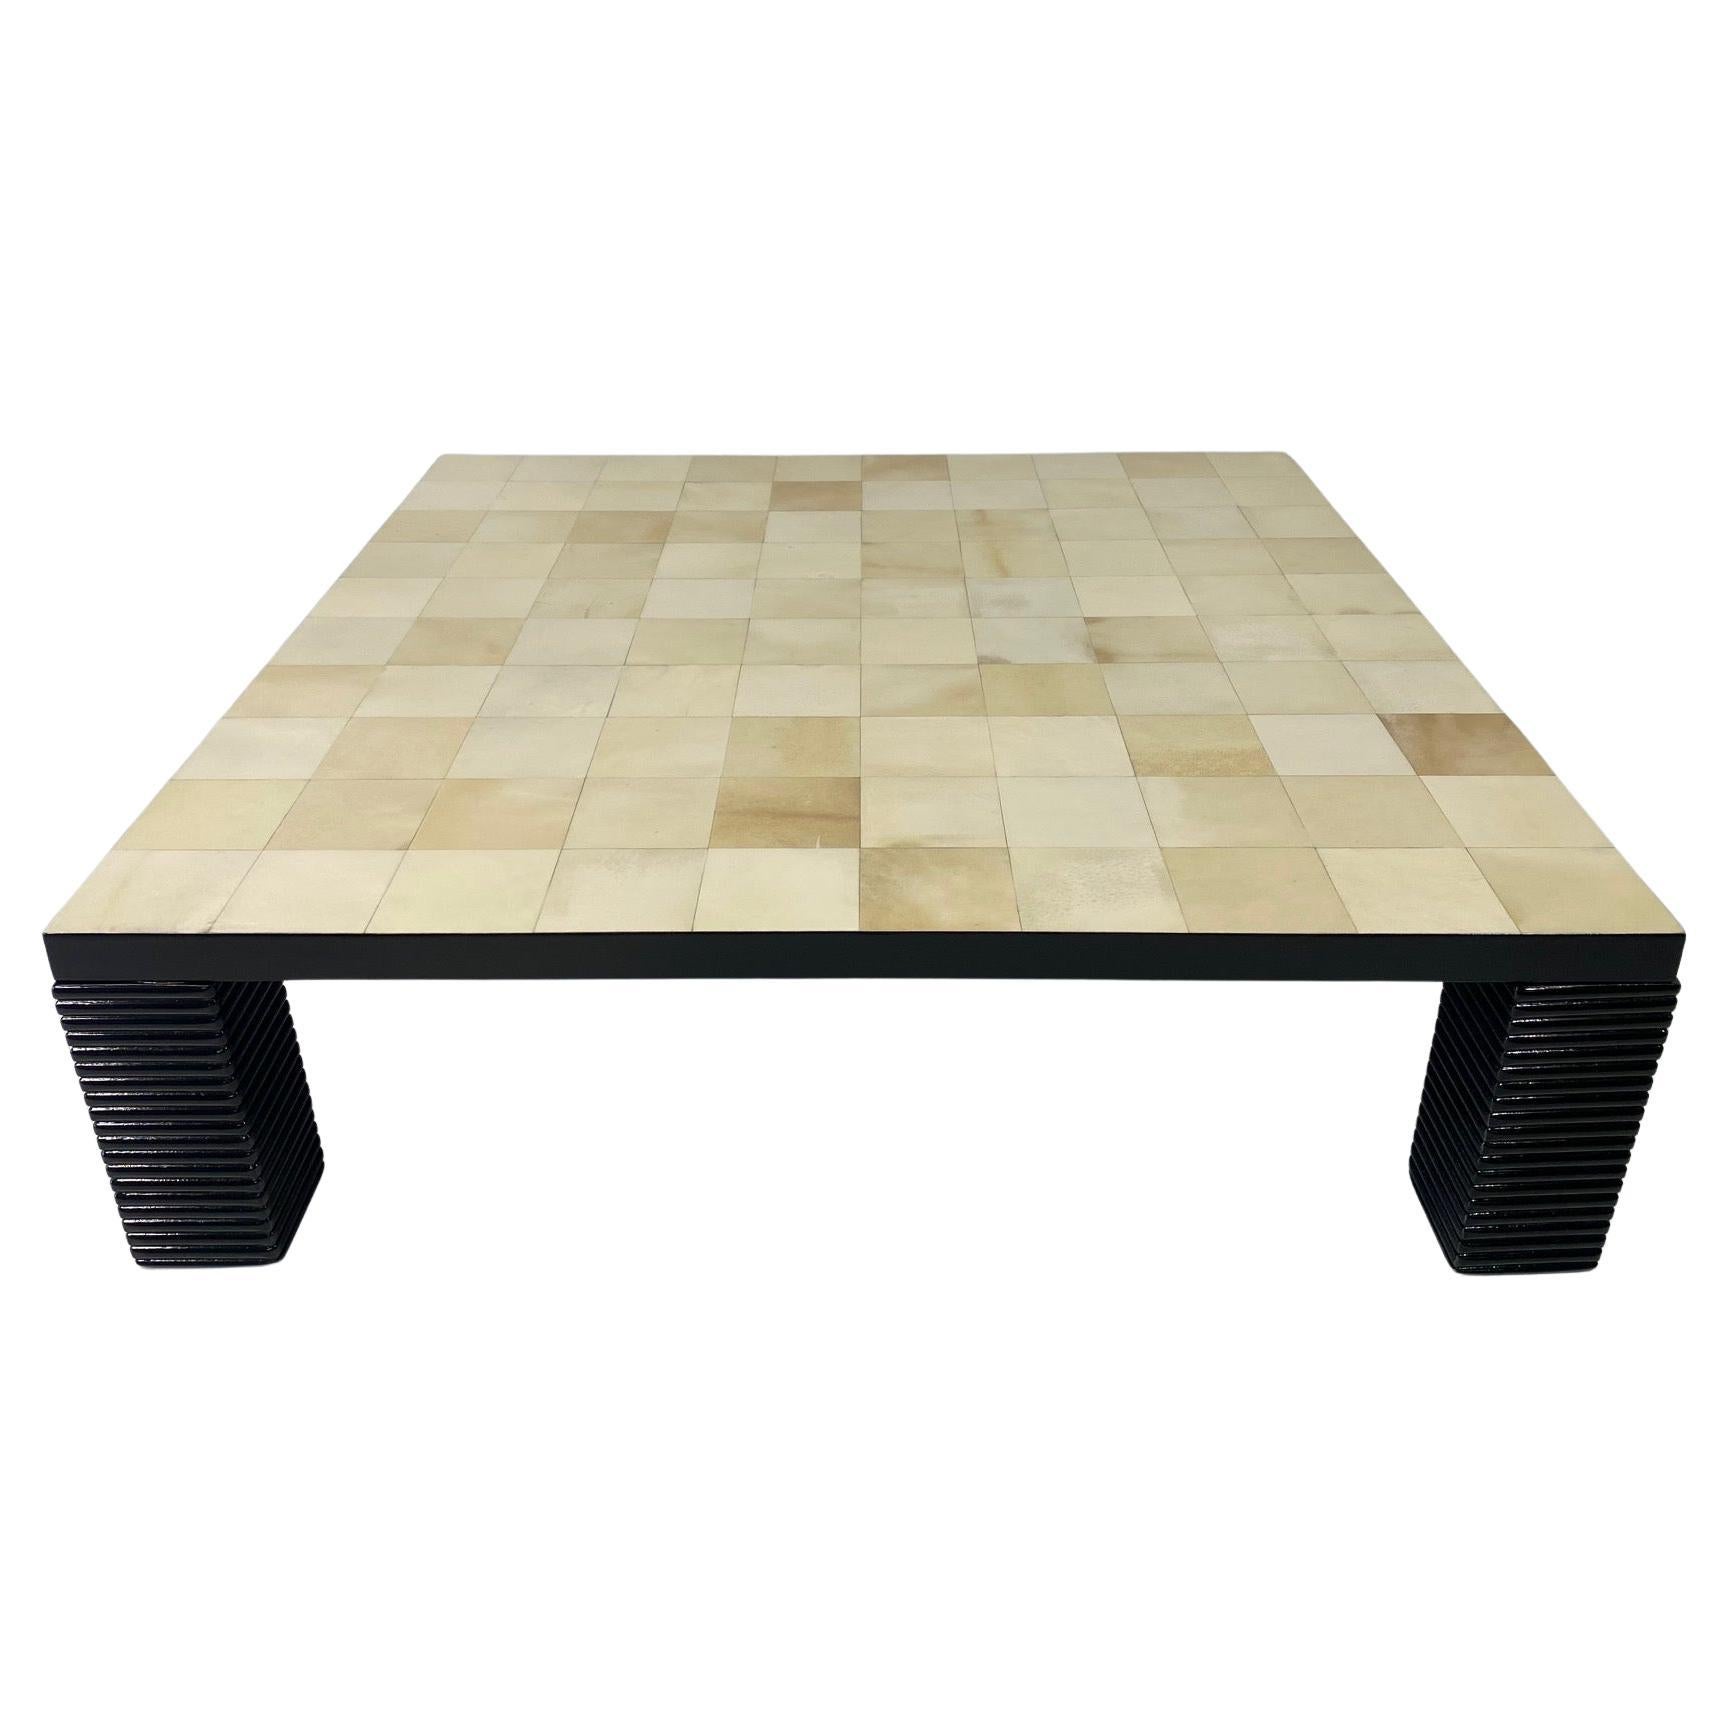 Italian Art Deco Parchment squares and Black Lacquered Coffee Table